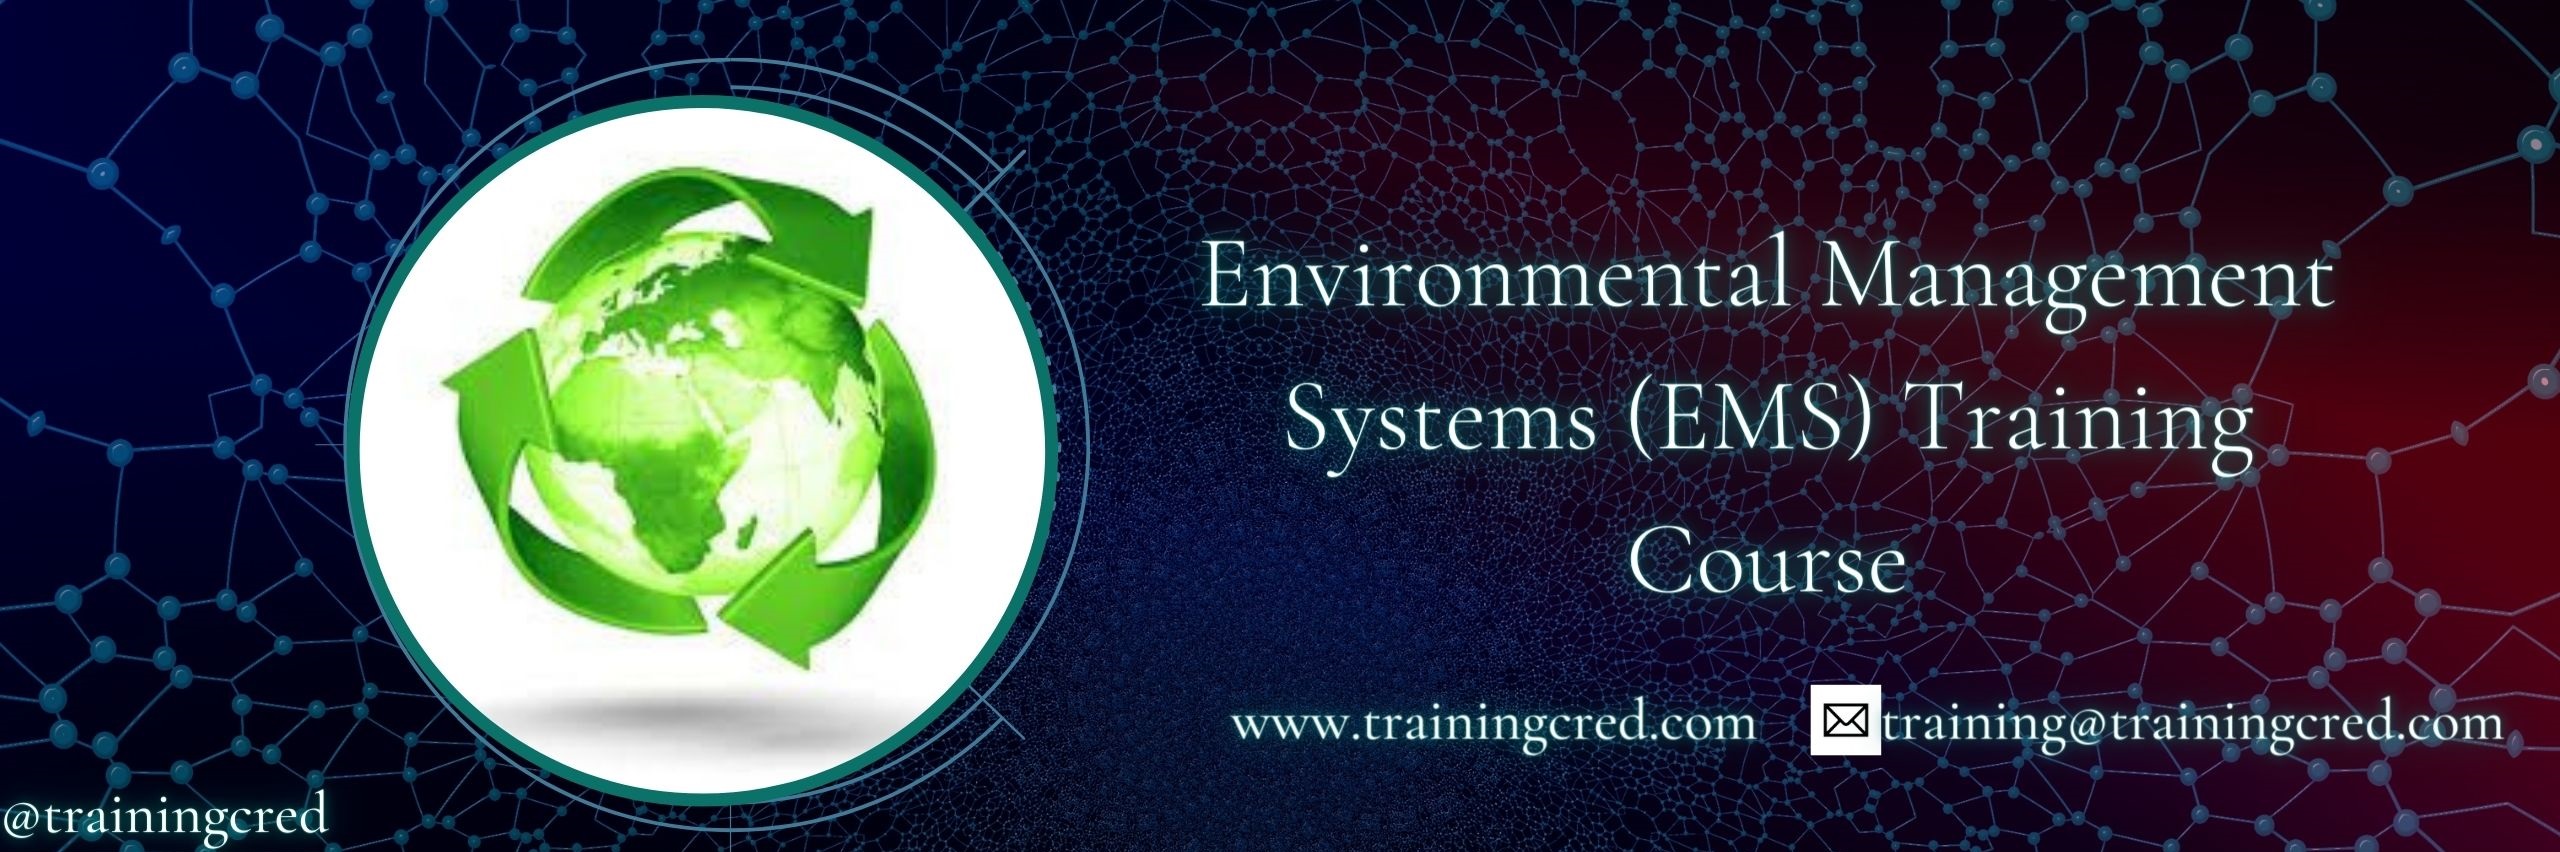 Environmental Management Systems (EMS) Training